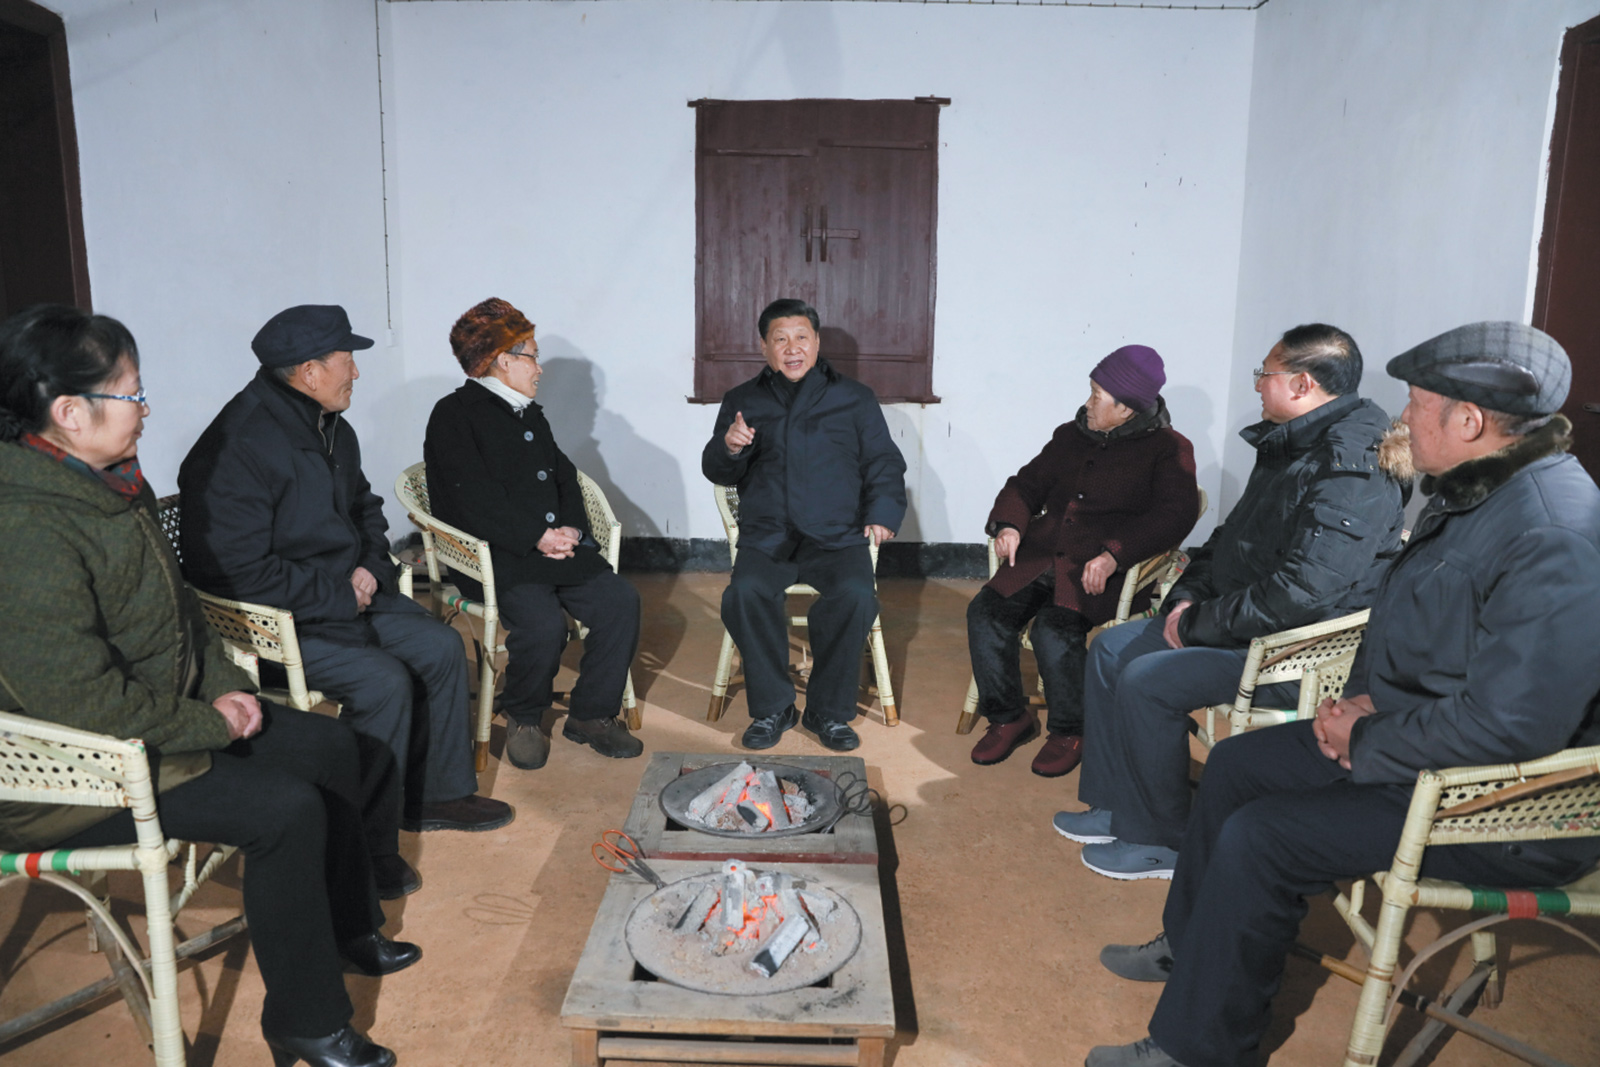 Xi Jinping, center, meeting with representatives and descendants of revolutionary martyrs in Nanchang, Jiangxi province, during a trip over the Lunar New Year that also included a pilgrimage to Jinggangshan, Mao’s first revolutionary base, February 2016